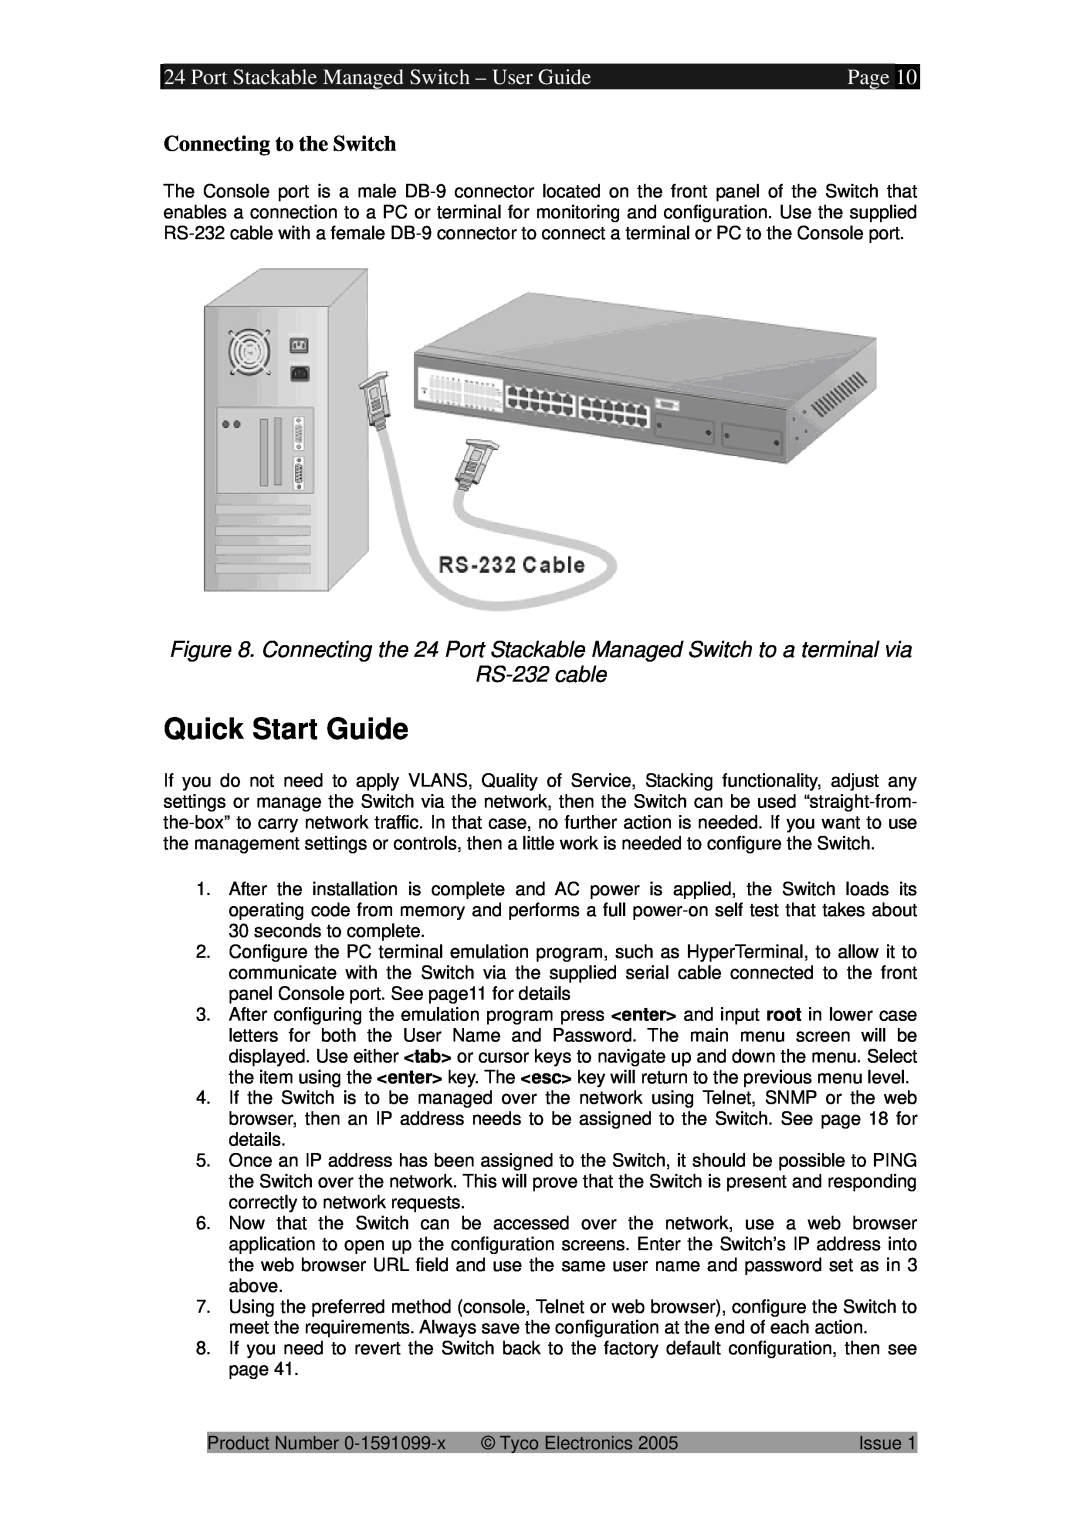 Tyco 0-1591099-x manual Quick Start Guide, Port Stackable Managed Switch - User Guide, Page, Connecting to the Switch 